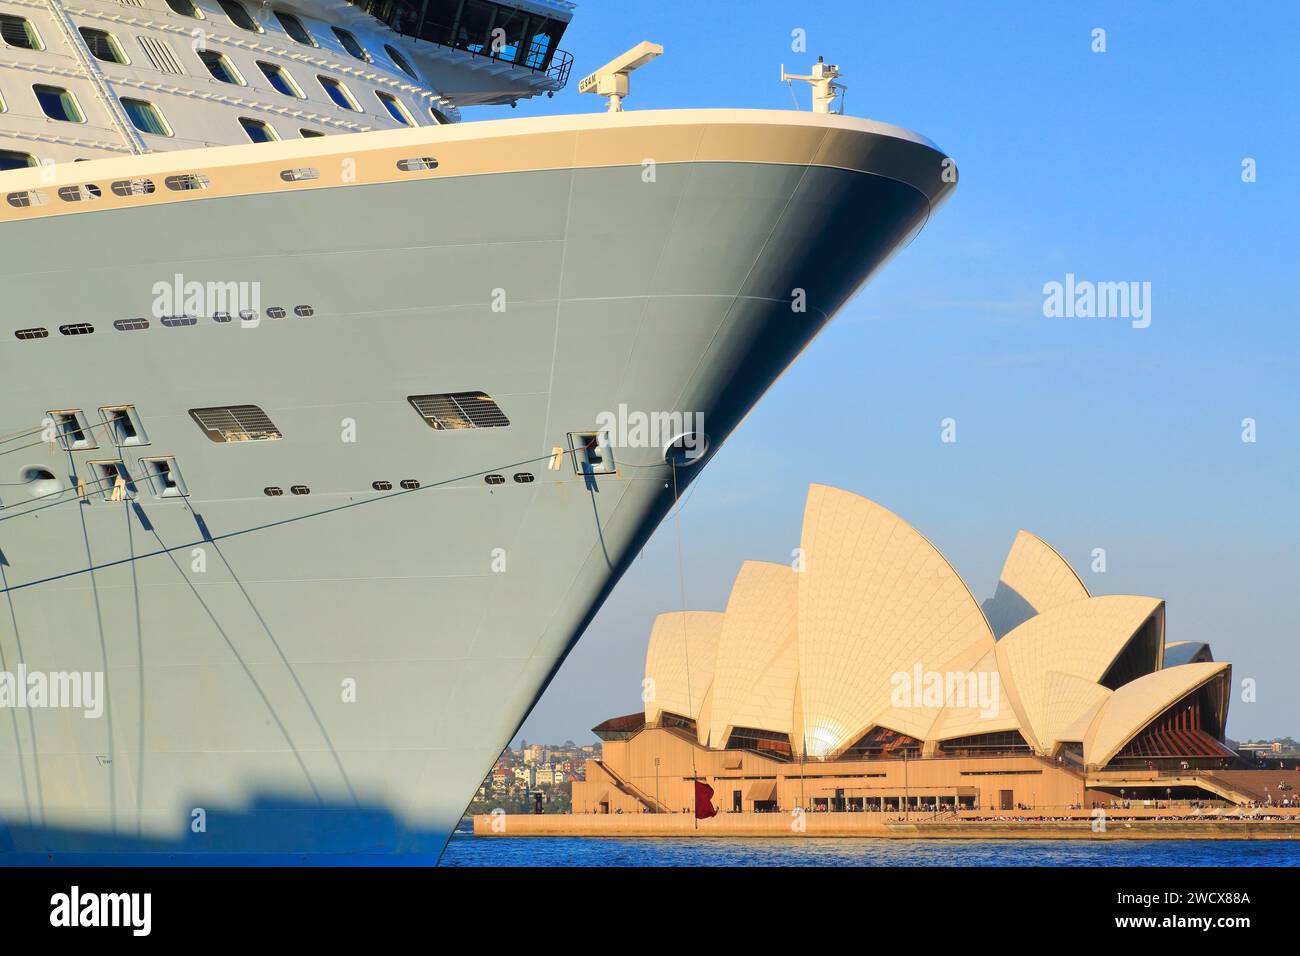 Australia, New South Wales, Sydney, Circular Quay, cruise ship in the harbor with the Sydney Opera House in the background Stock Photo